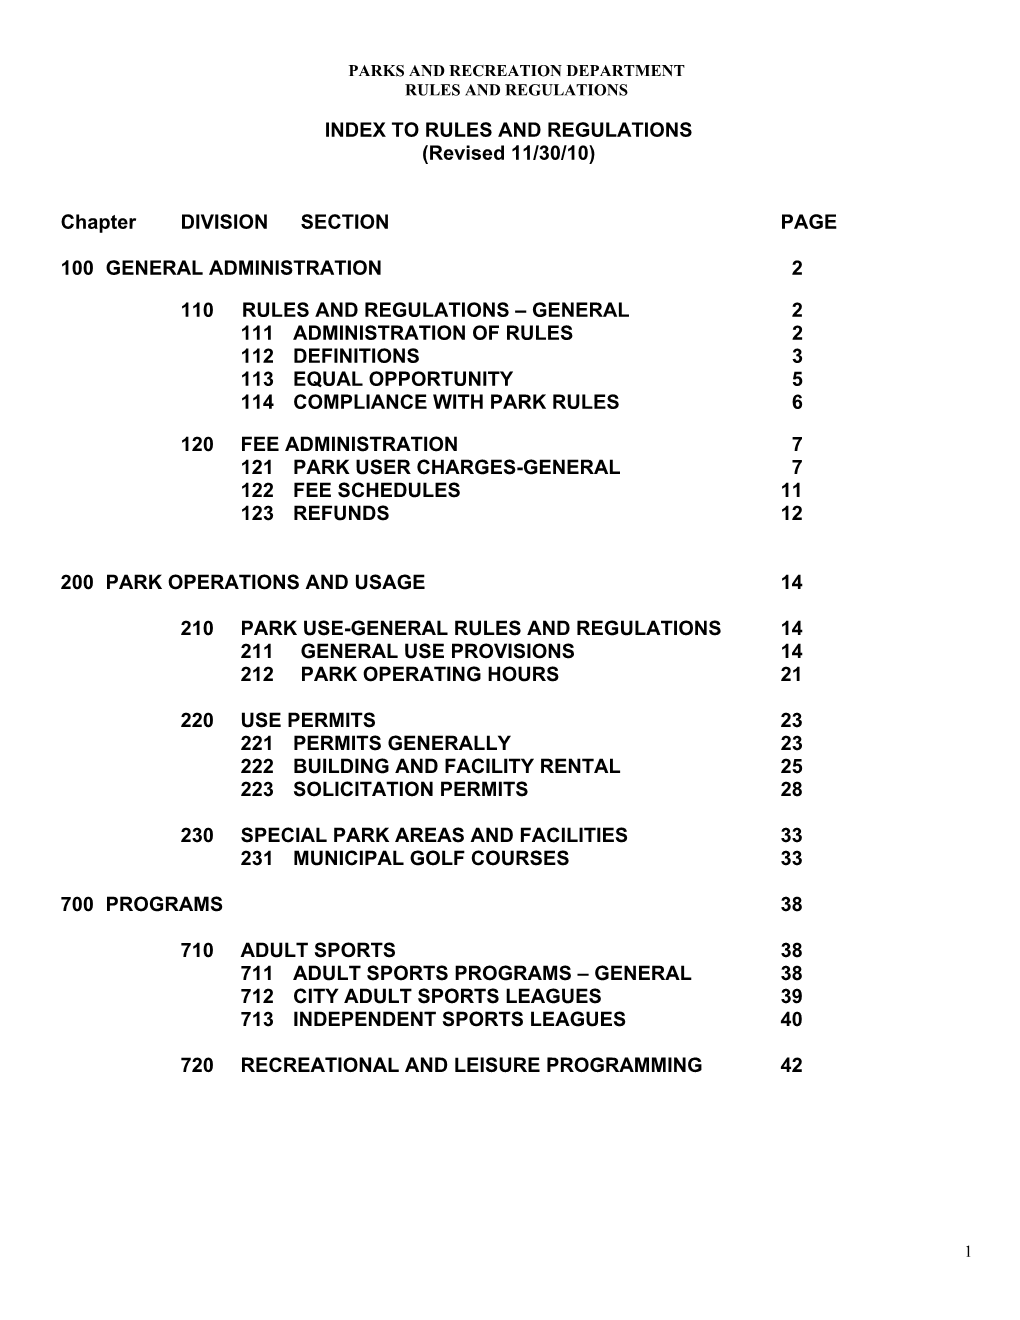 (Revised 11/30/10) Chapter DIVISION SECTION PAGE 100 GENERAL ADMINISTRATION 2 110 RULES A